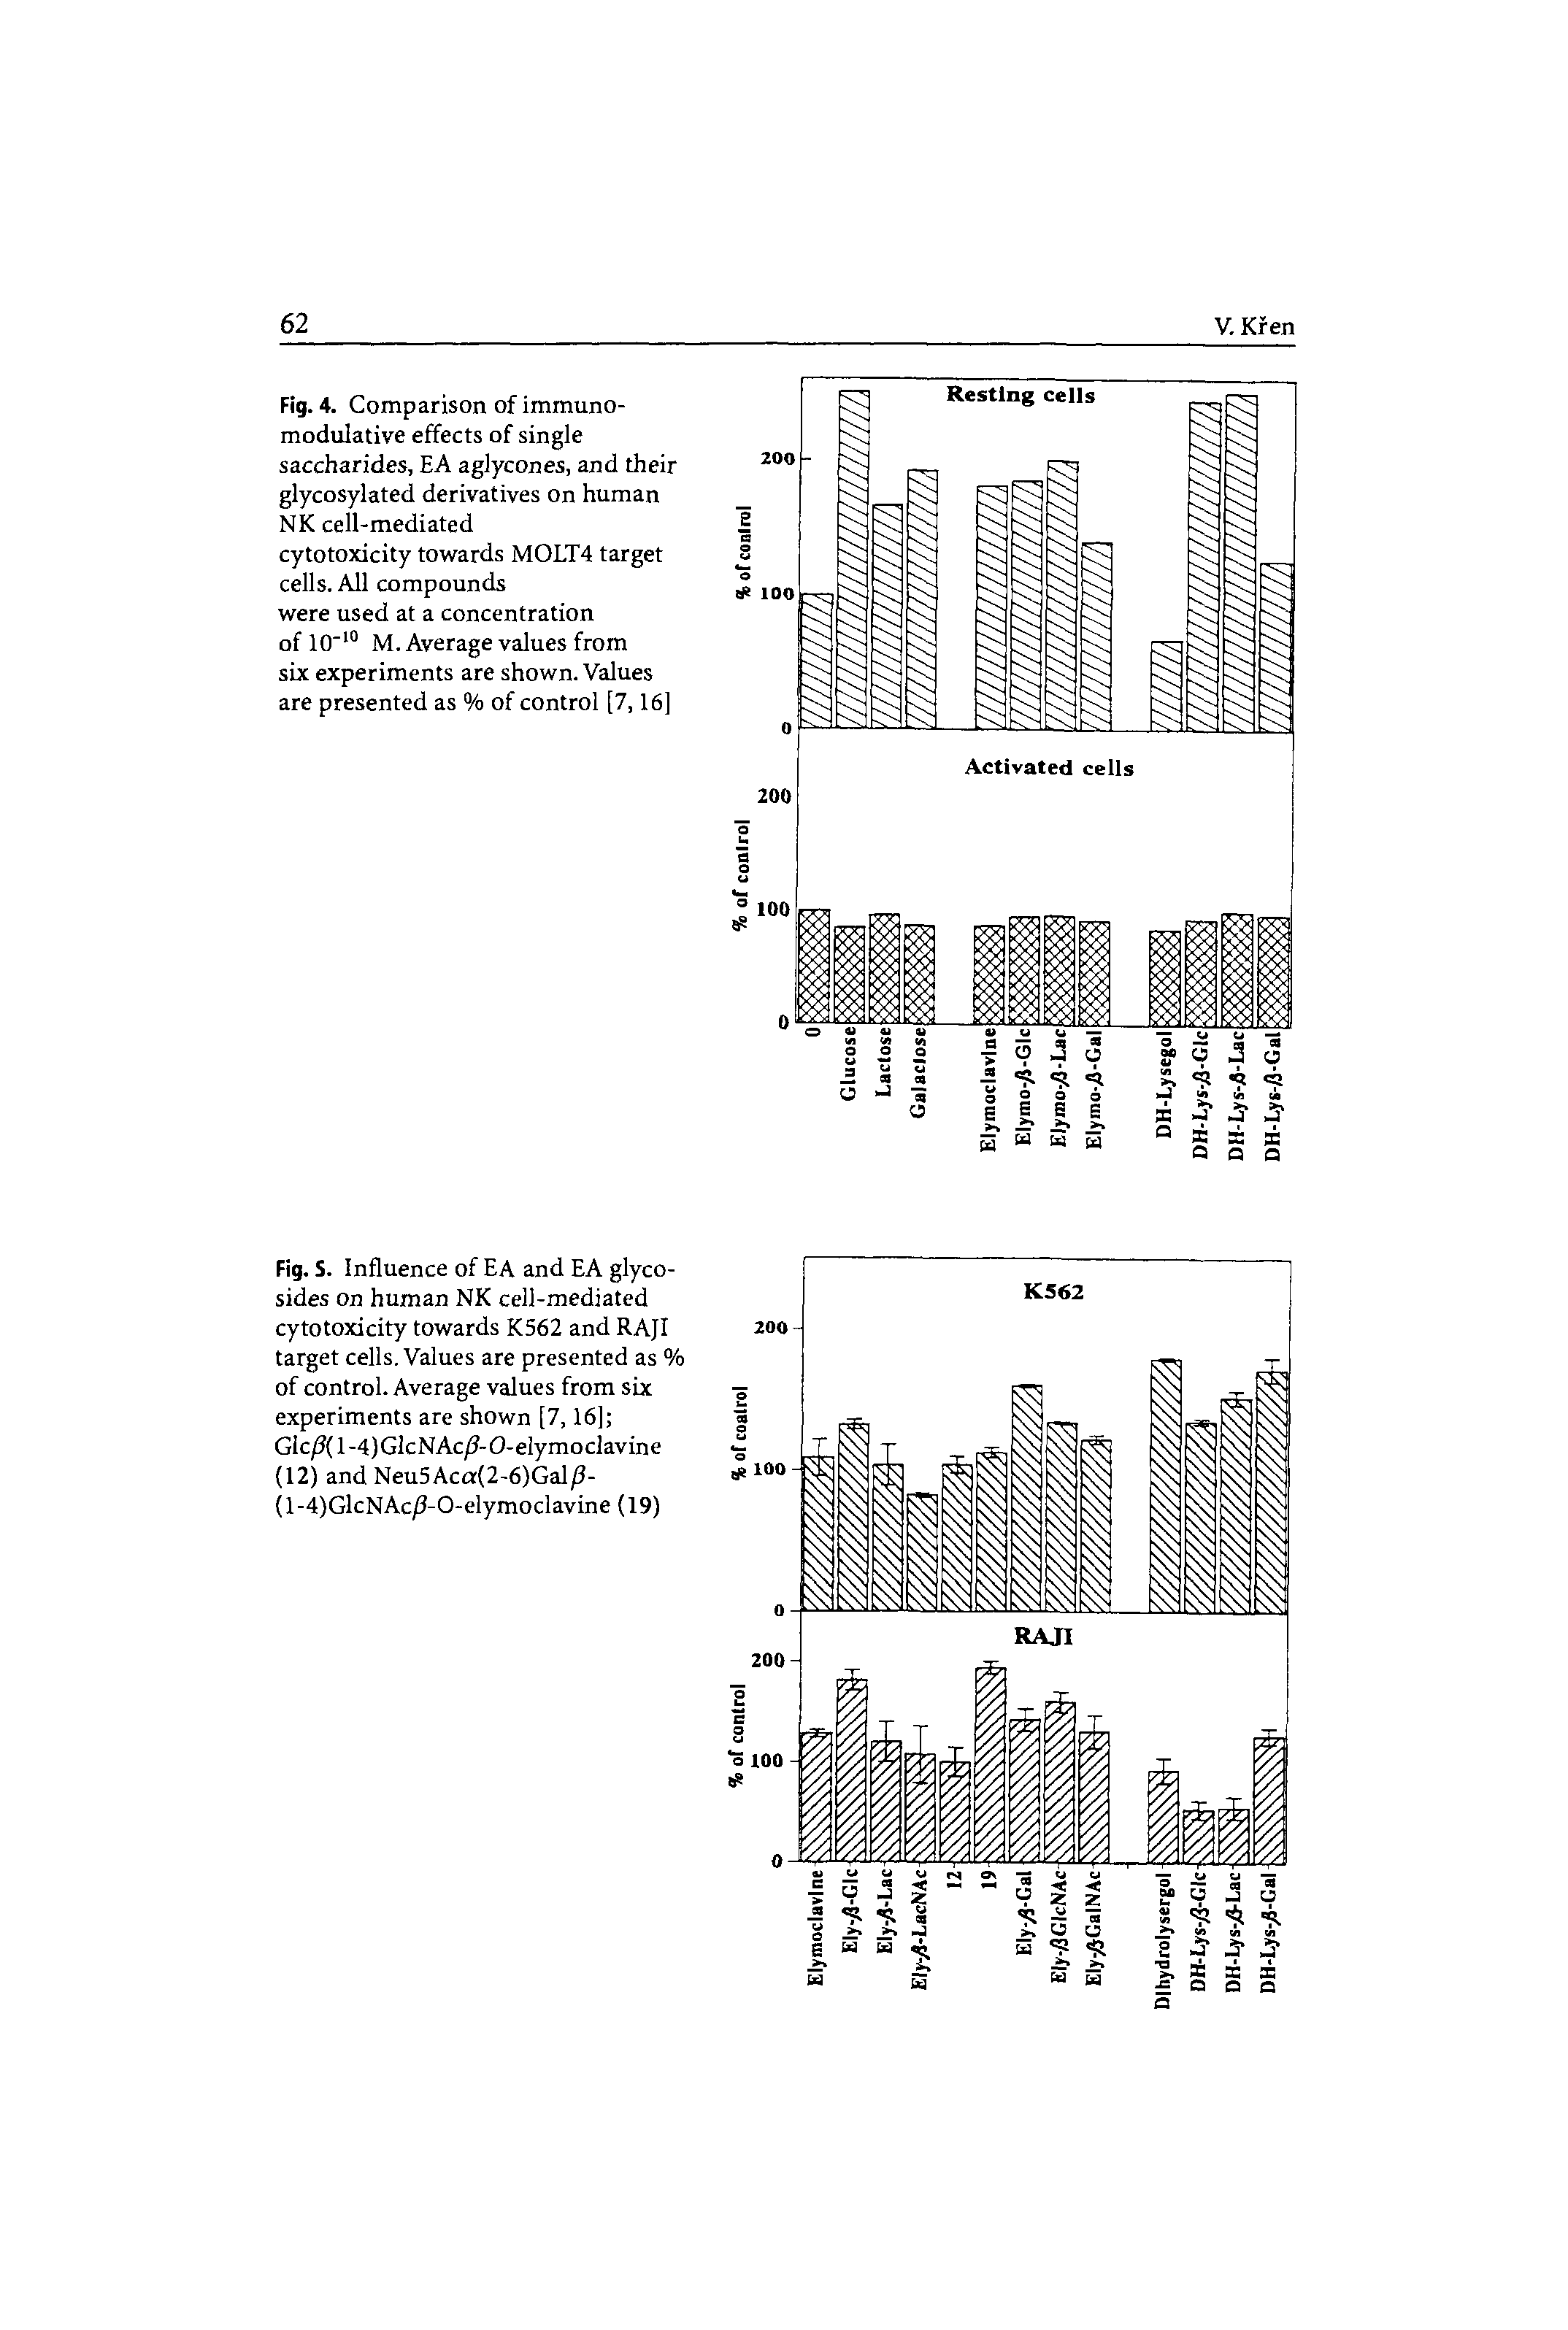 Fig. 4. Comparison of immuno-modulative effects of single saccharides, EA aglycones, and their glycosylated derivatives on human NK cell-mediated cytotoxicity towards MOLT4 target cells. All compounds were used at a concentration of 10 M. Average values from six experiments are shown. Values are presented as % of control [7,16]...